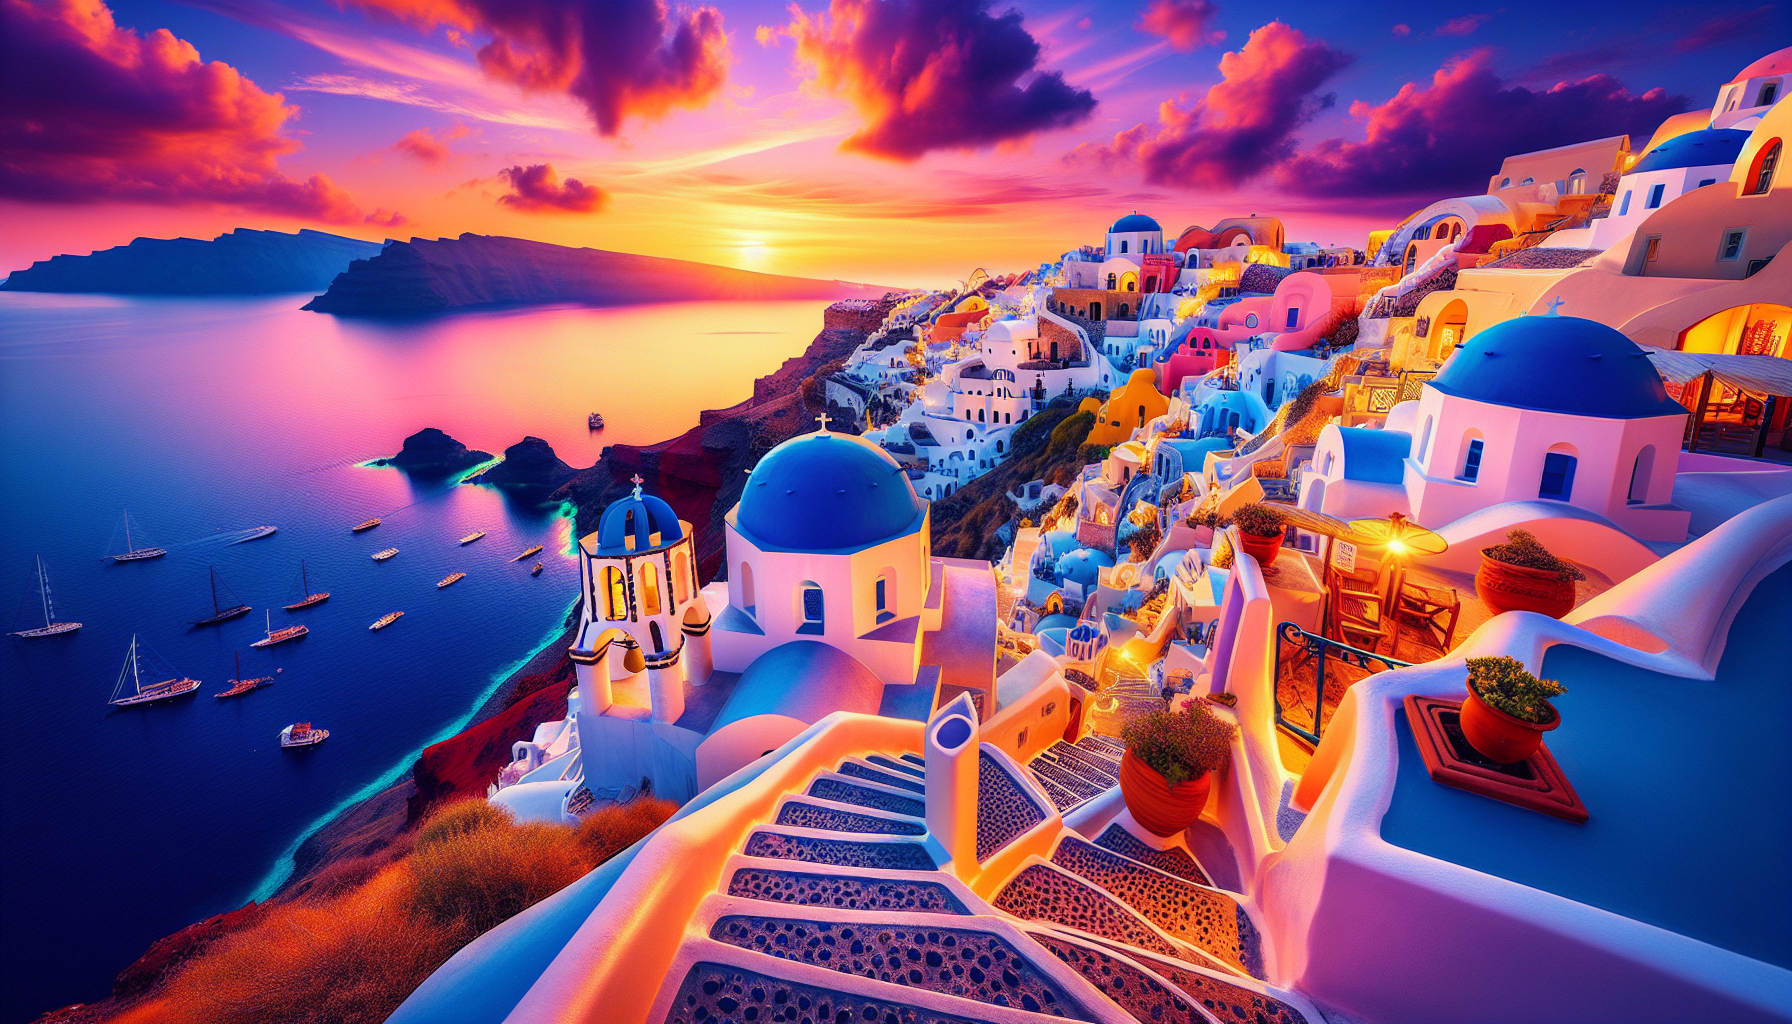 explore the best places to visit in europe, including the stunning island of santorini, known for its breathtaking views and charming atmosphere.